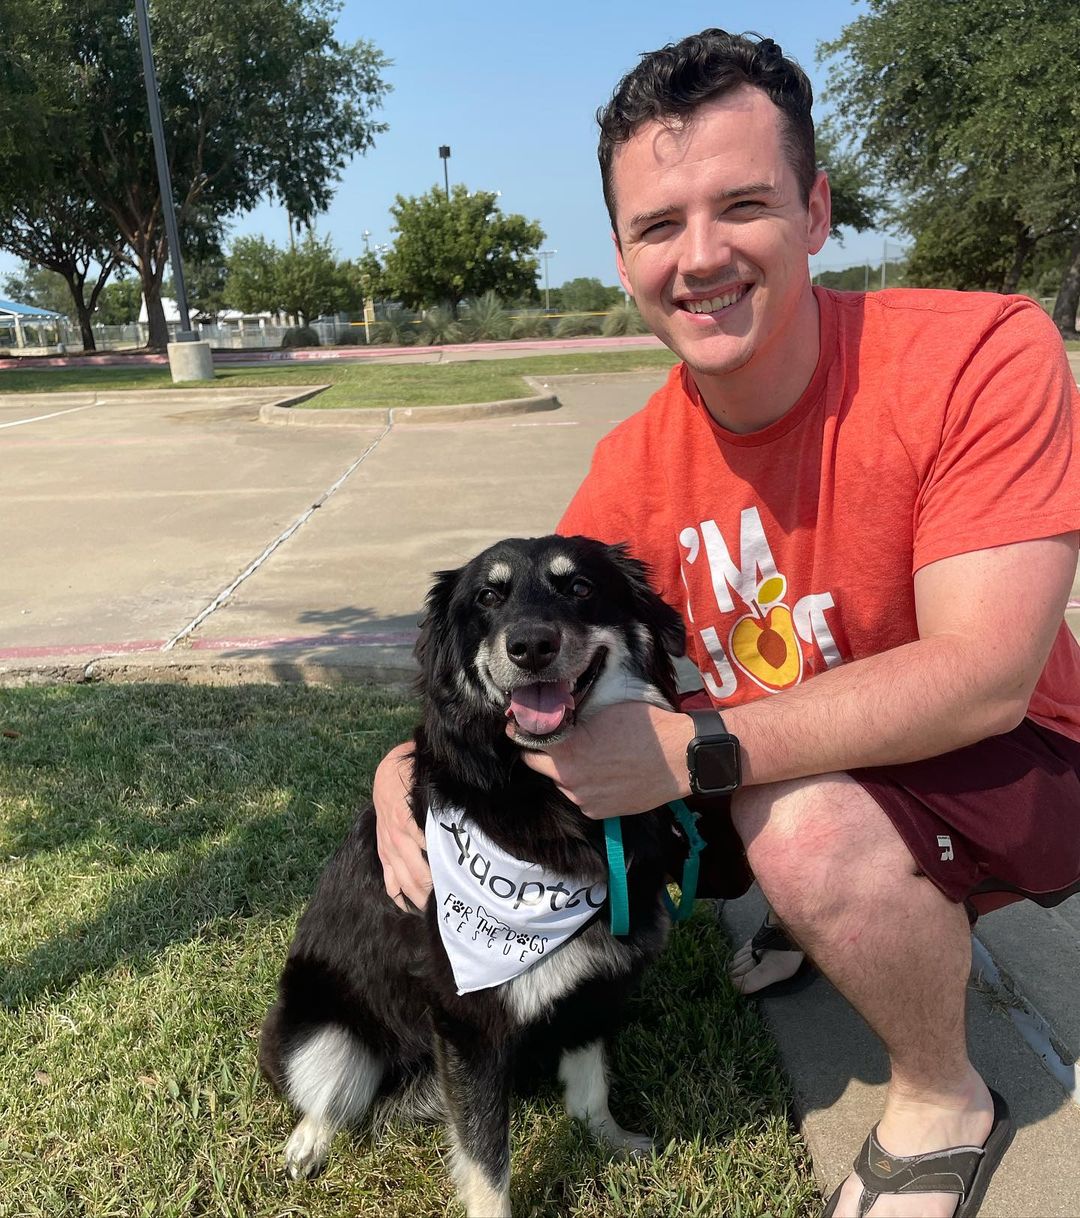 Happy Adoption Day, Luna!! She came to us after someone reached out about seeing Luna being dumped in the Dallas area. She’s now spayed, healthy and ready to continue learning to trust people with her new owner❤️🐶😊